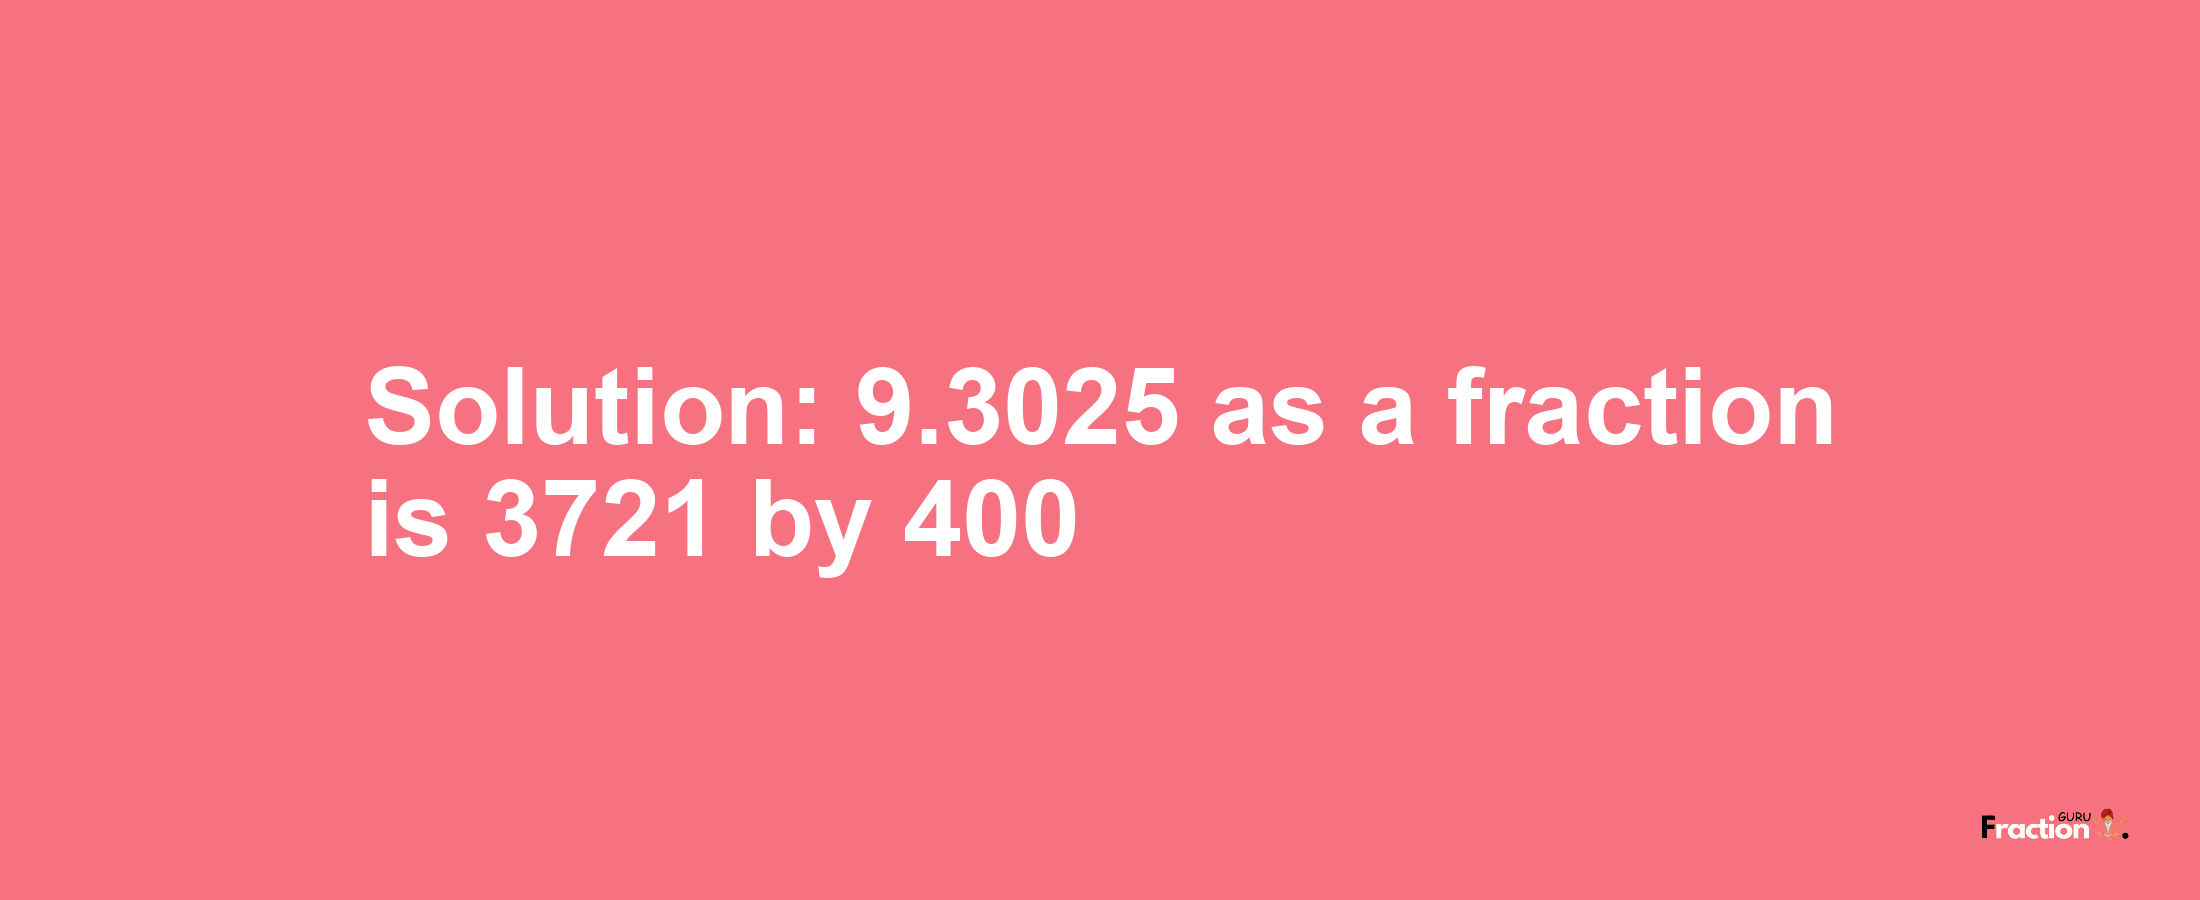 Solution:9.3025 as a fraction is 3721/400